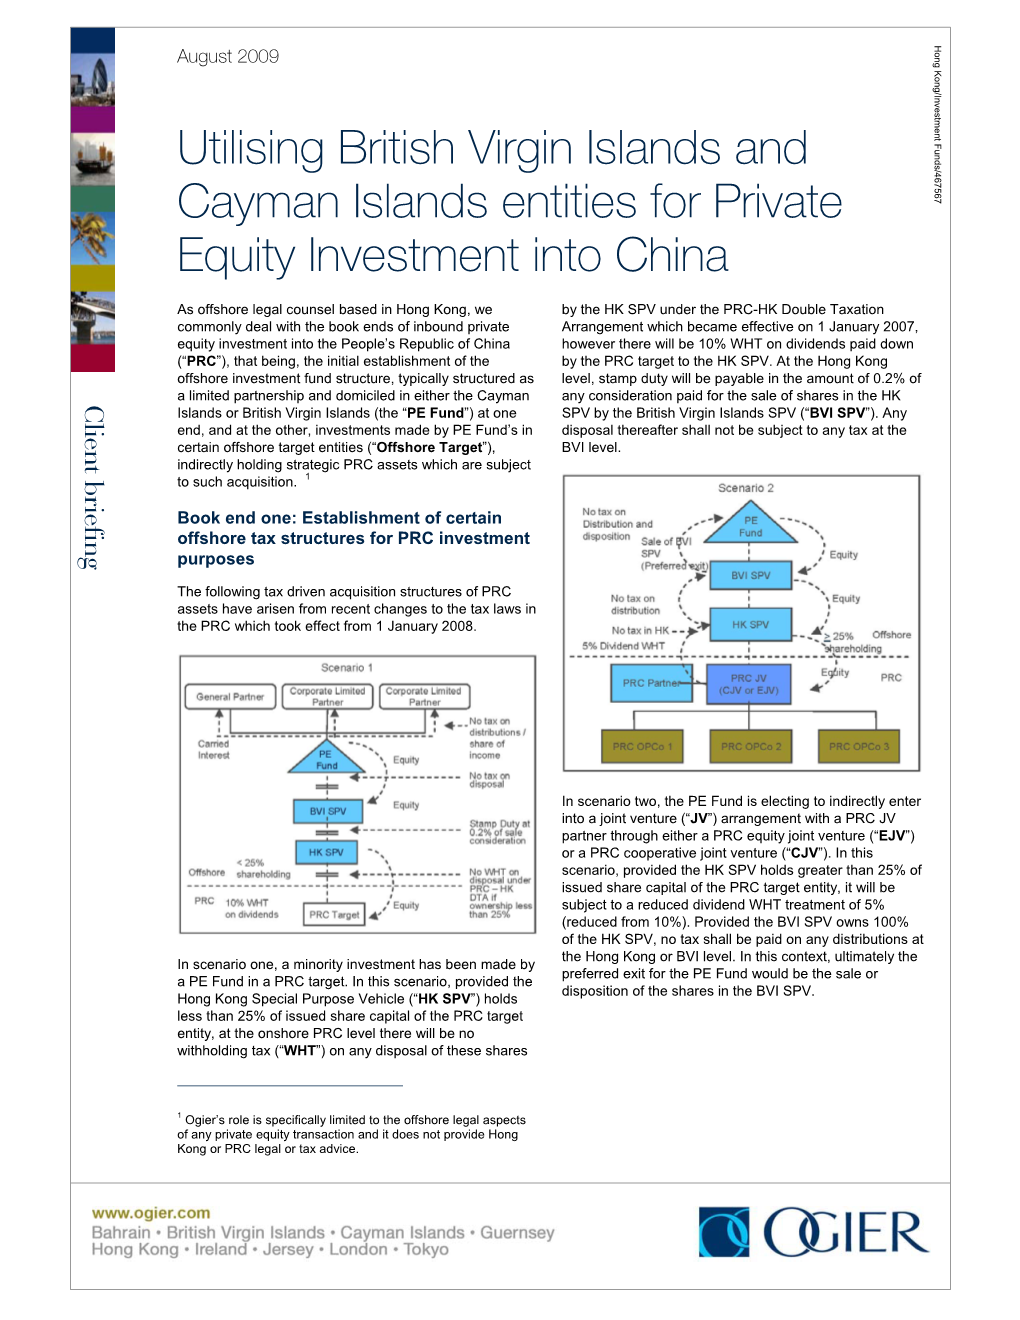 Utilising British Virgin Islands and Cayman Islands Entities for Private Equity Investment Into China